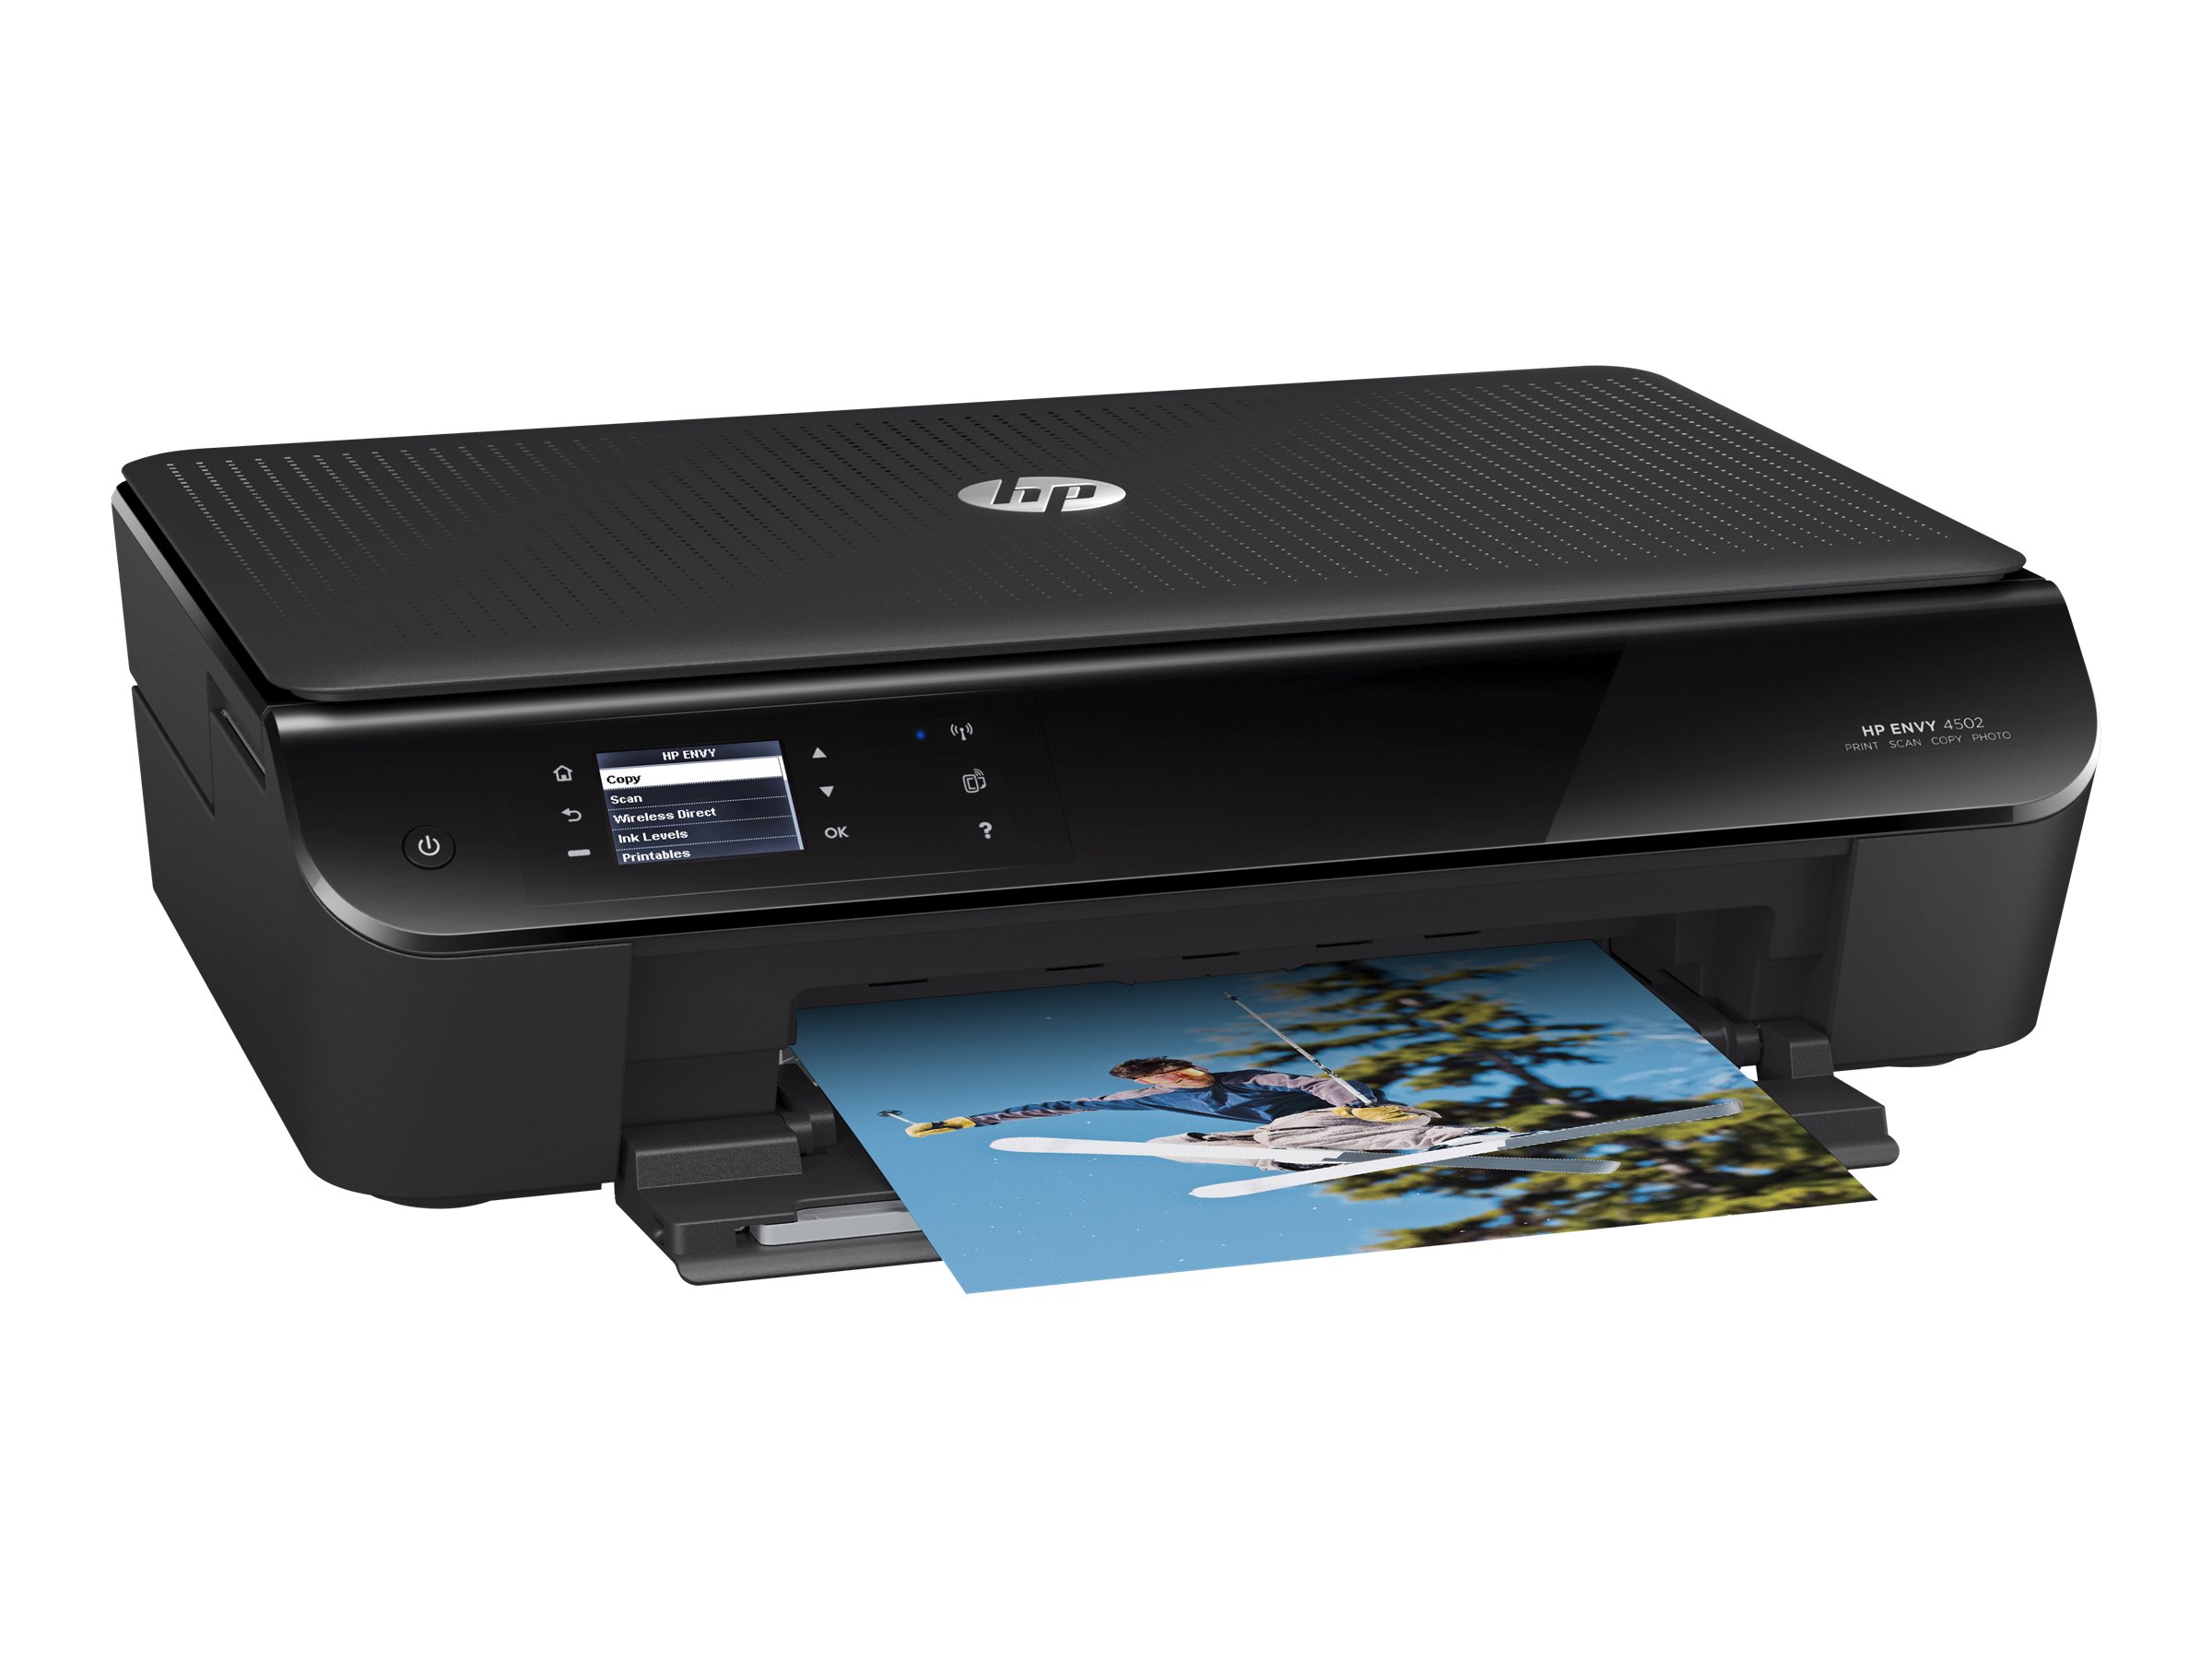 HP ENVY 4502 e-All-in-One - Multifunction printer - color - ink-jet - Legal (8.5 in x 14 in)/A4 (8.25 in x 11.7 in) (original) - A4/Legal (media) - up to 6 ppm (copying) - up to 8.8 ppm (printing) - 100 sheets - USB 2.0, Wi-Fi(n) - image 4 of 5